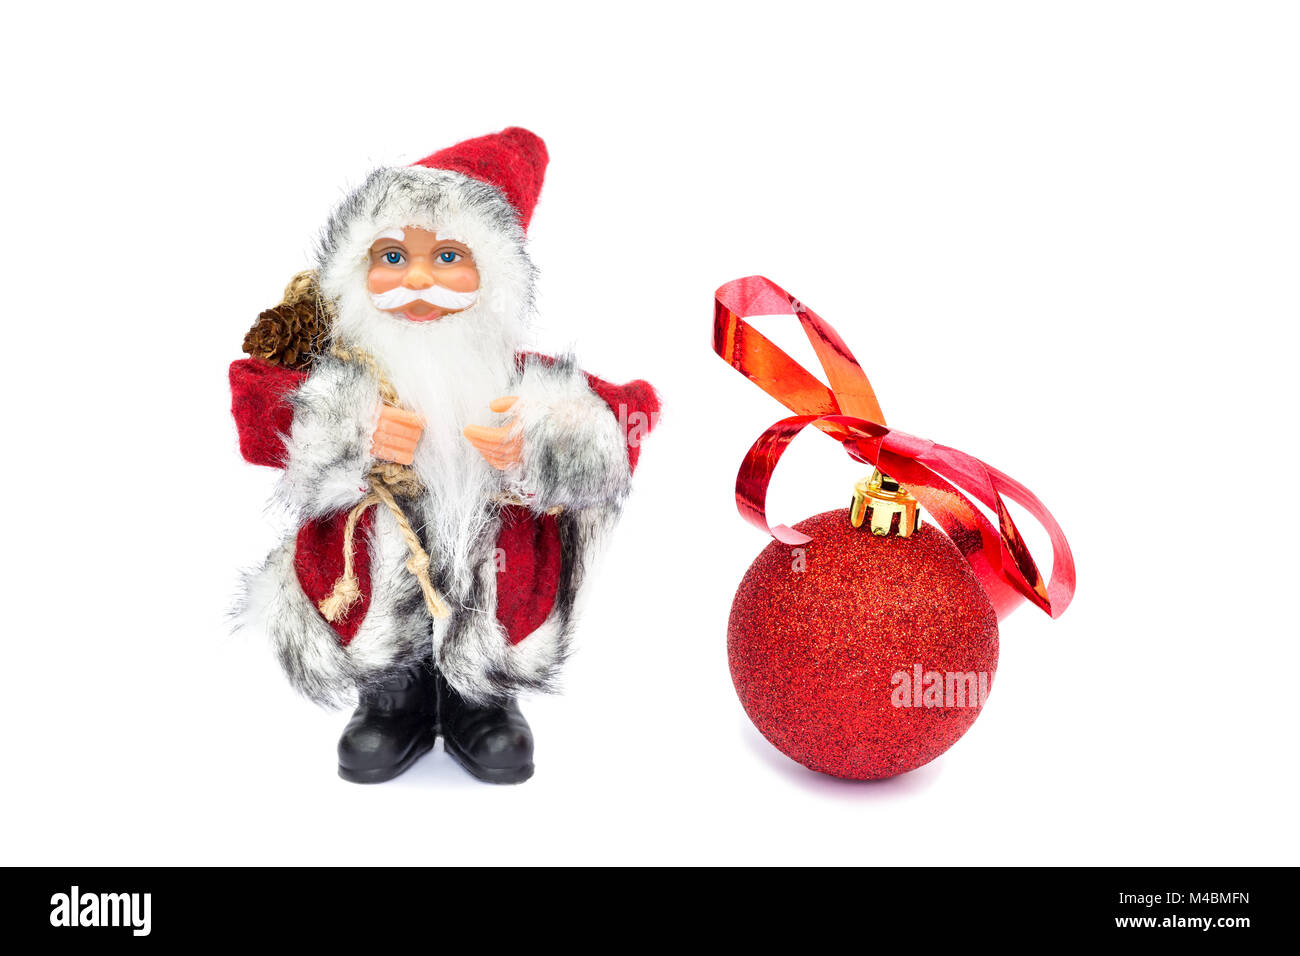 Santa Claus figurine with red christmas ball on white Stock Photo